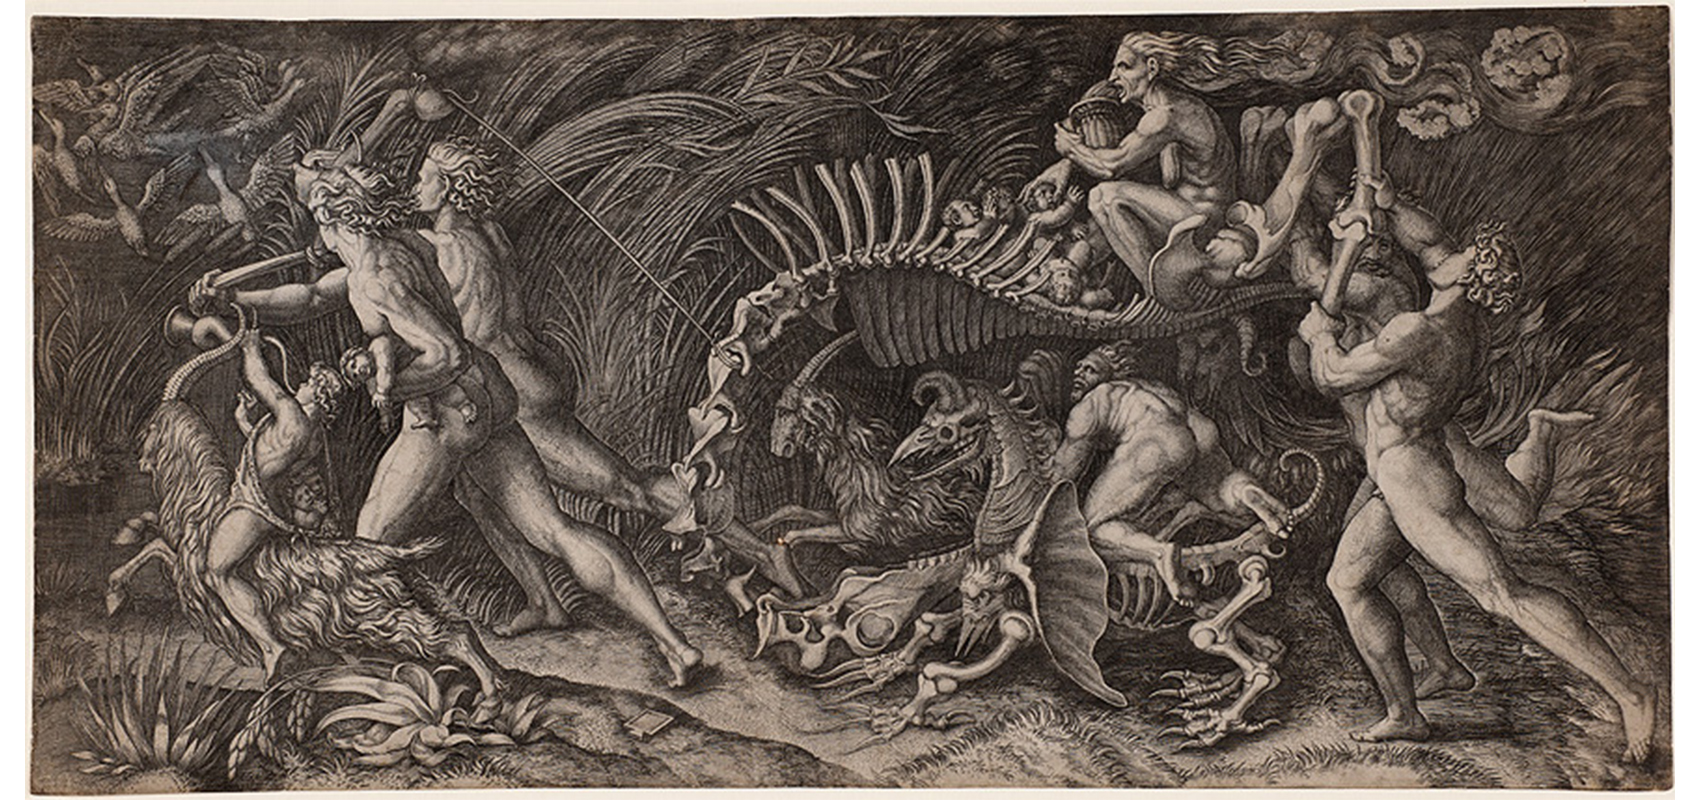 witches riding a carcas; men and various grotesque figures chasing them